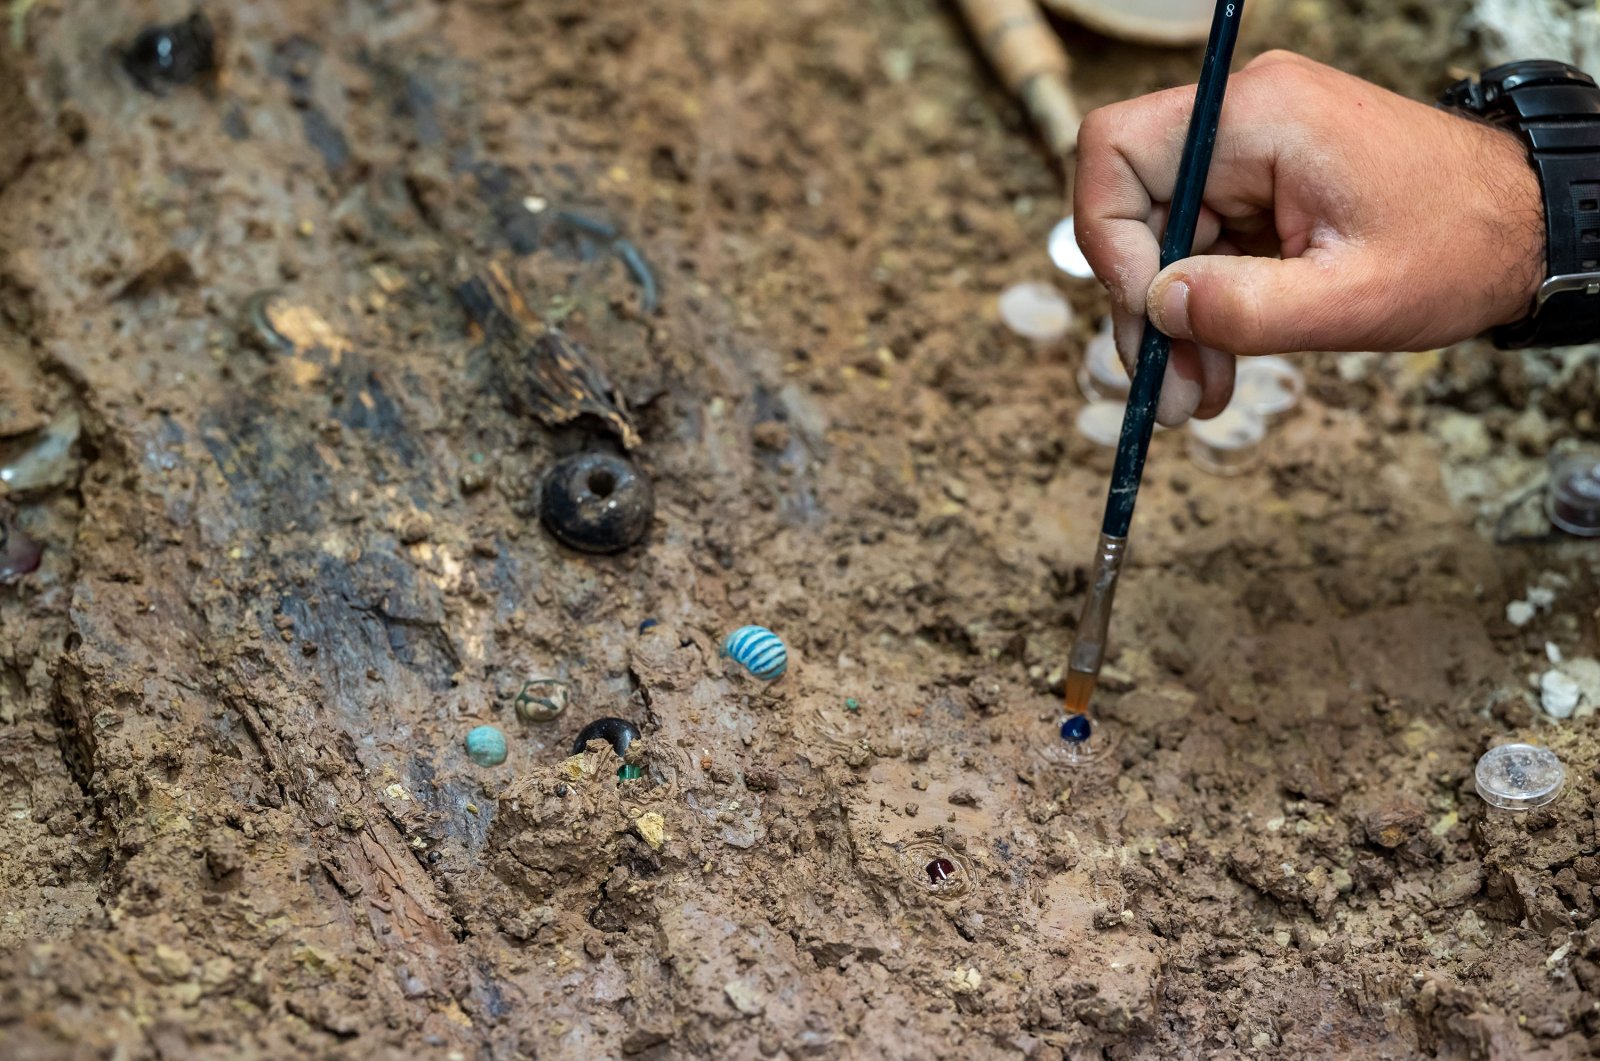 A restorer works at the Rheinisches Landesmuseum on beads made of glass and rock crystal that were recently found during a block salvage near Trier, Germany, June 23, 2021. (Getty Images)